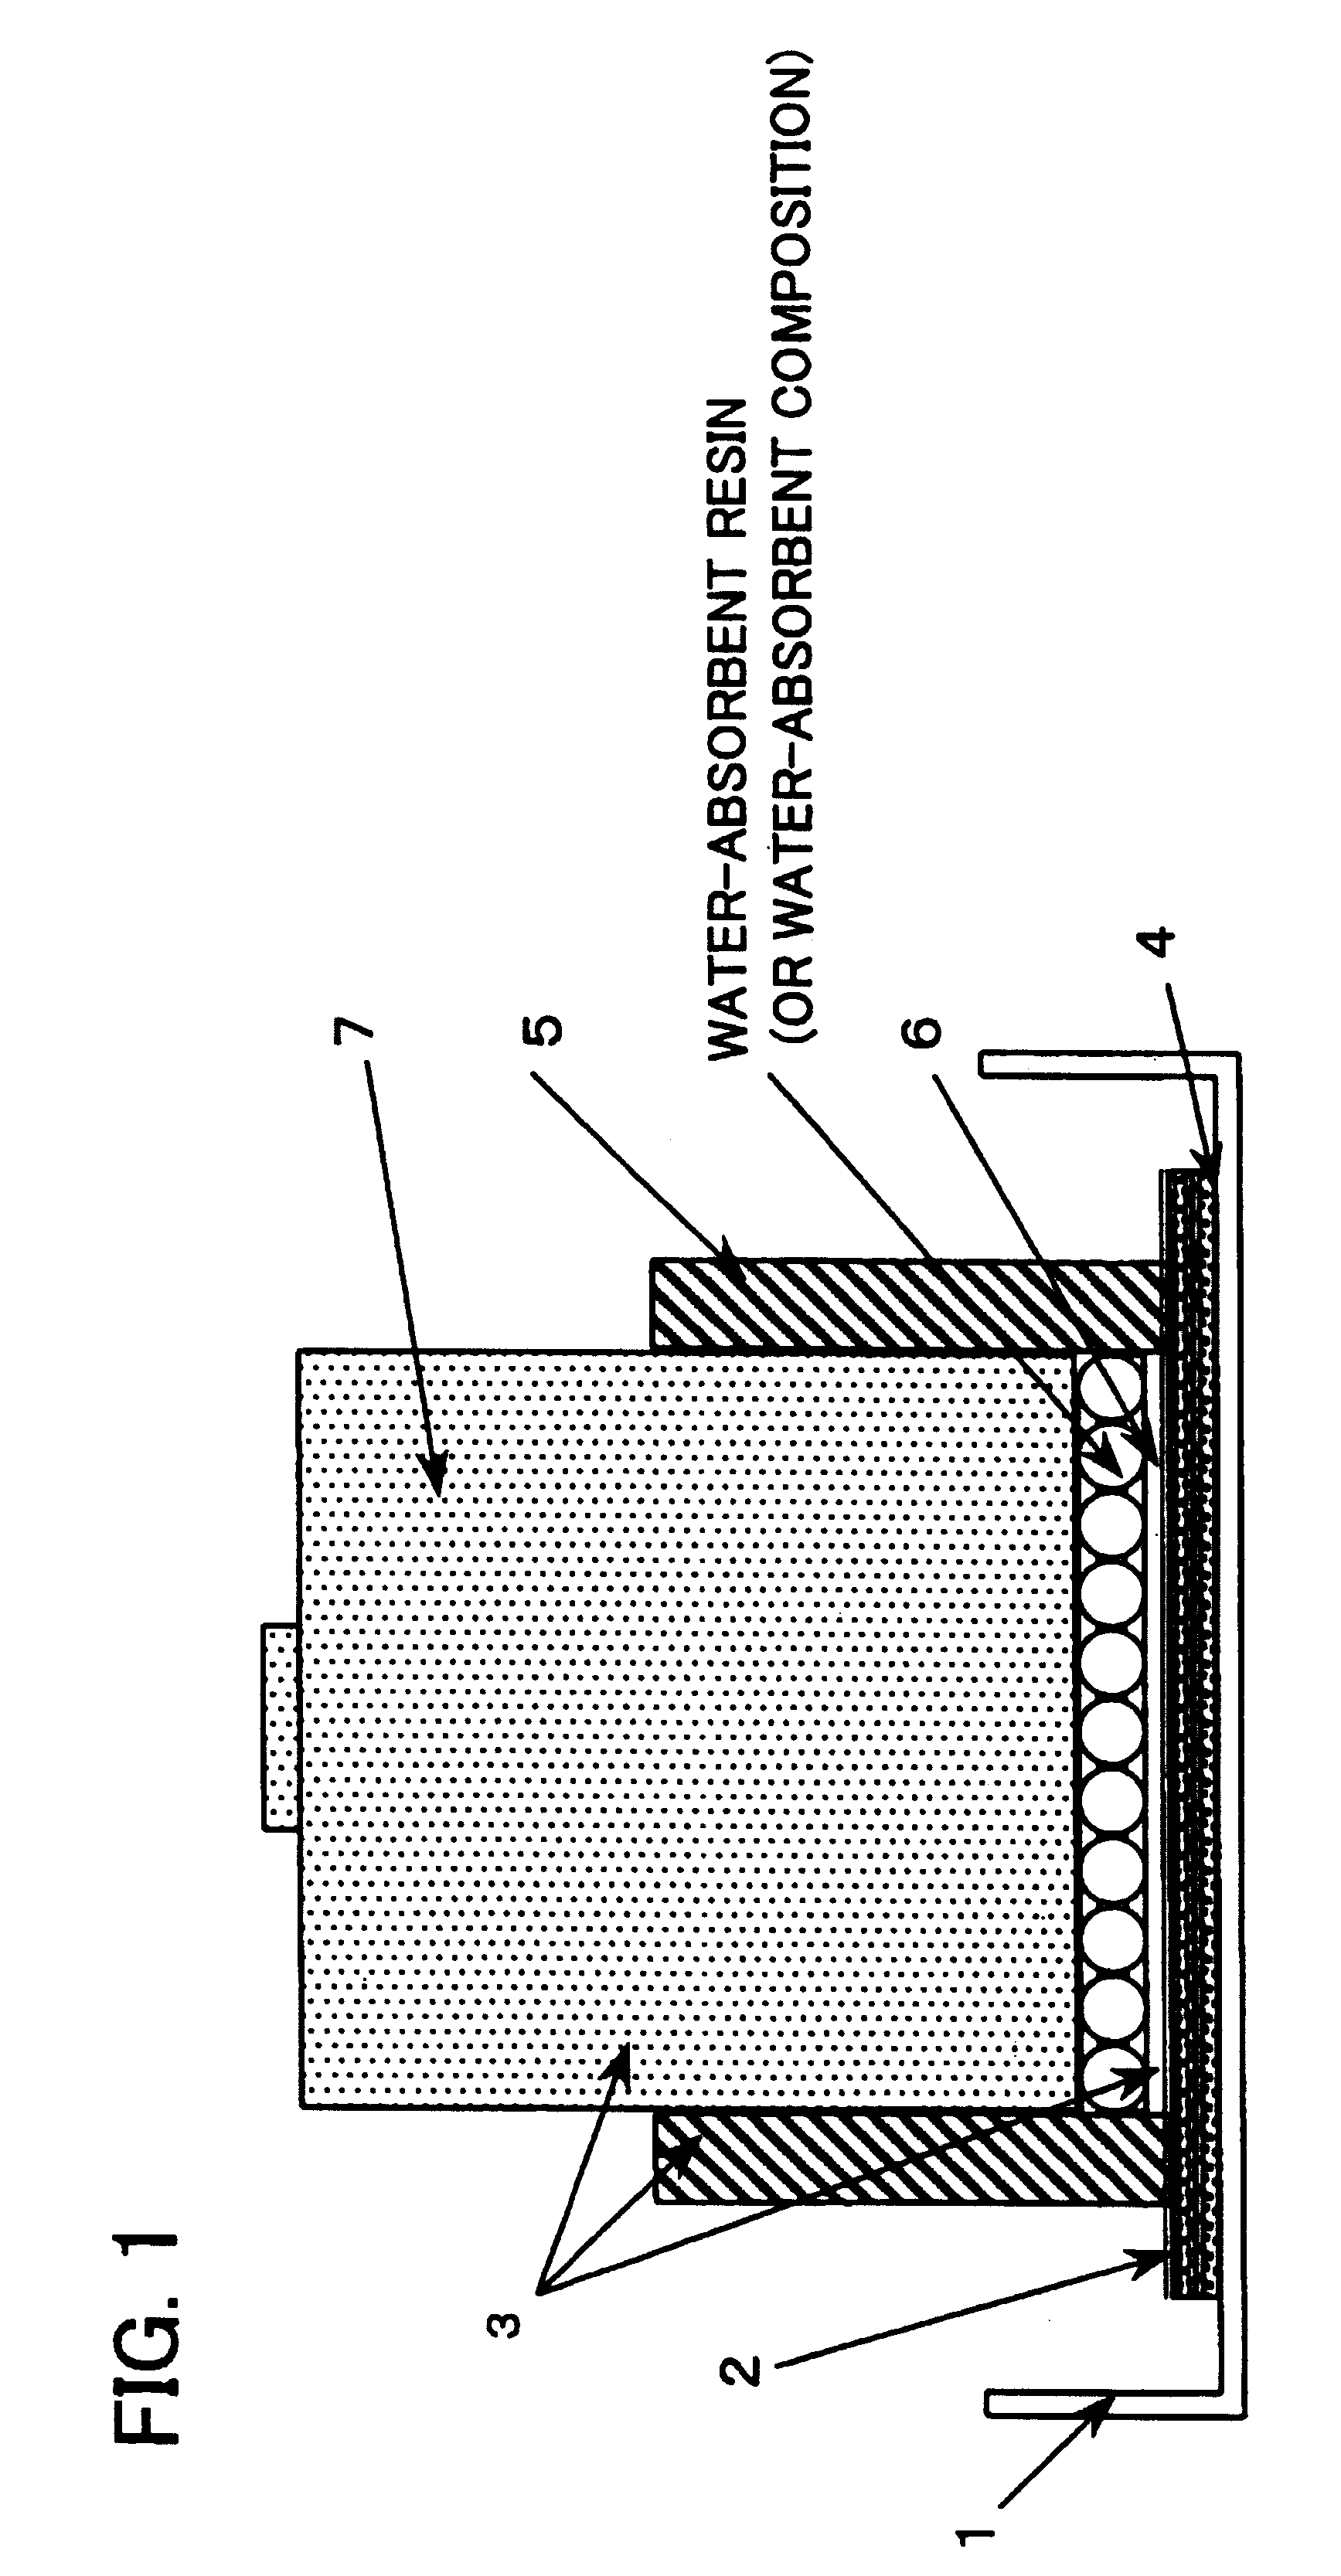 Water-absorbent composition, process for production thereof, absorbent and absorbing product